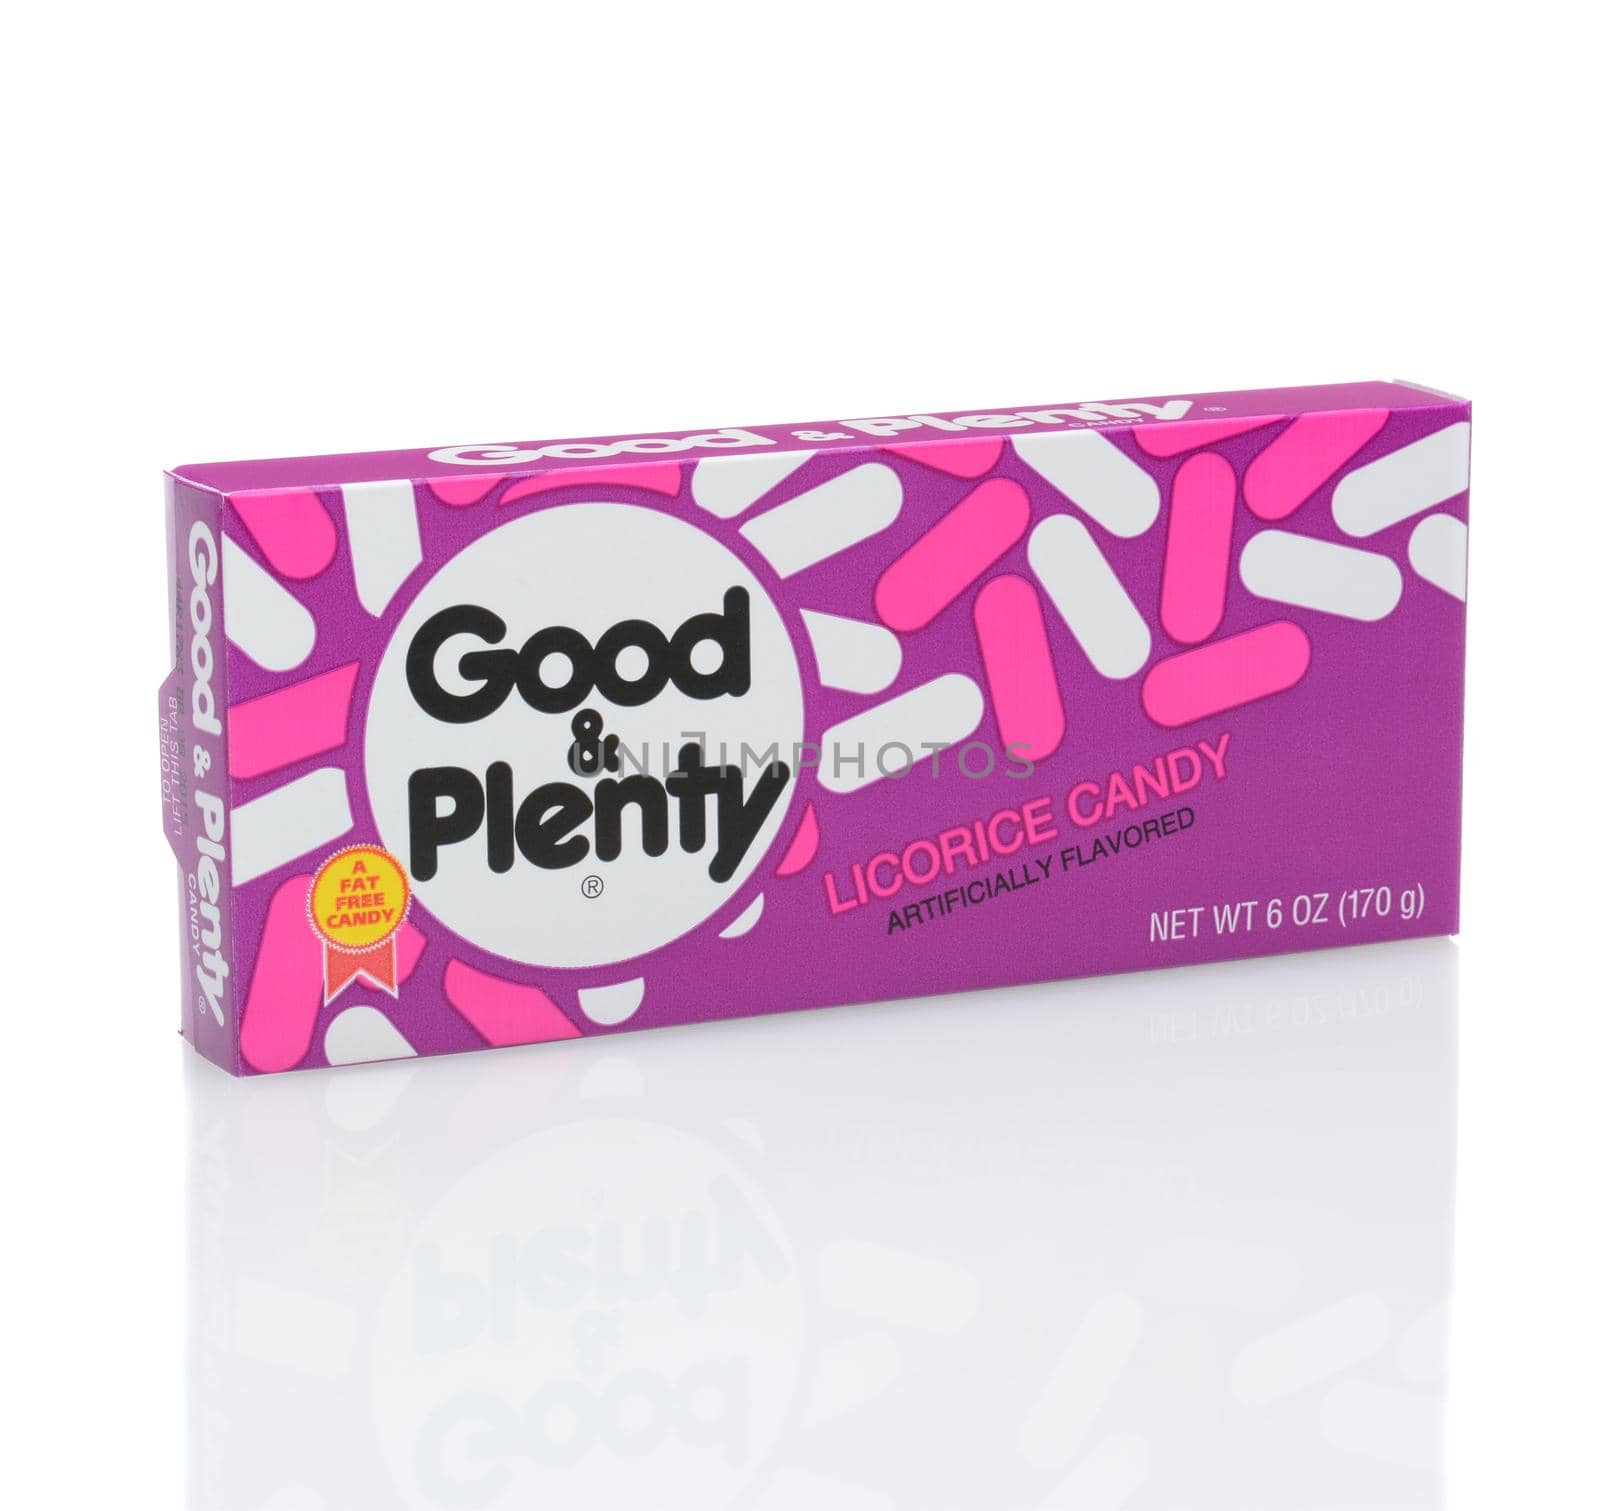 IRVINE, CALIFORNIA - DECEMBER 12, 2014: A box of Good & Plenty Candy. First produced by the Quaker City Confectionery Company in 1893, it is the oldest branded candy in the United States.